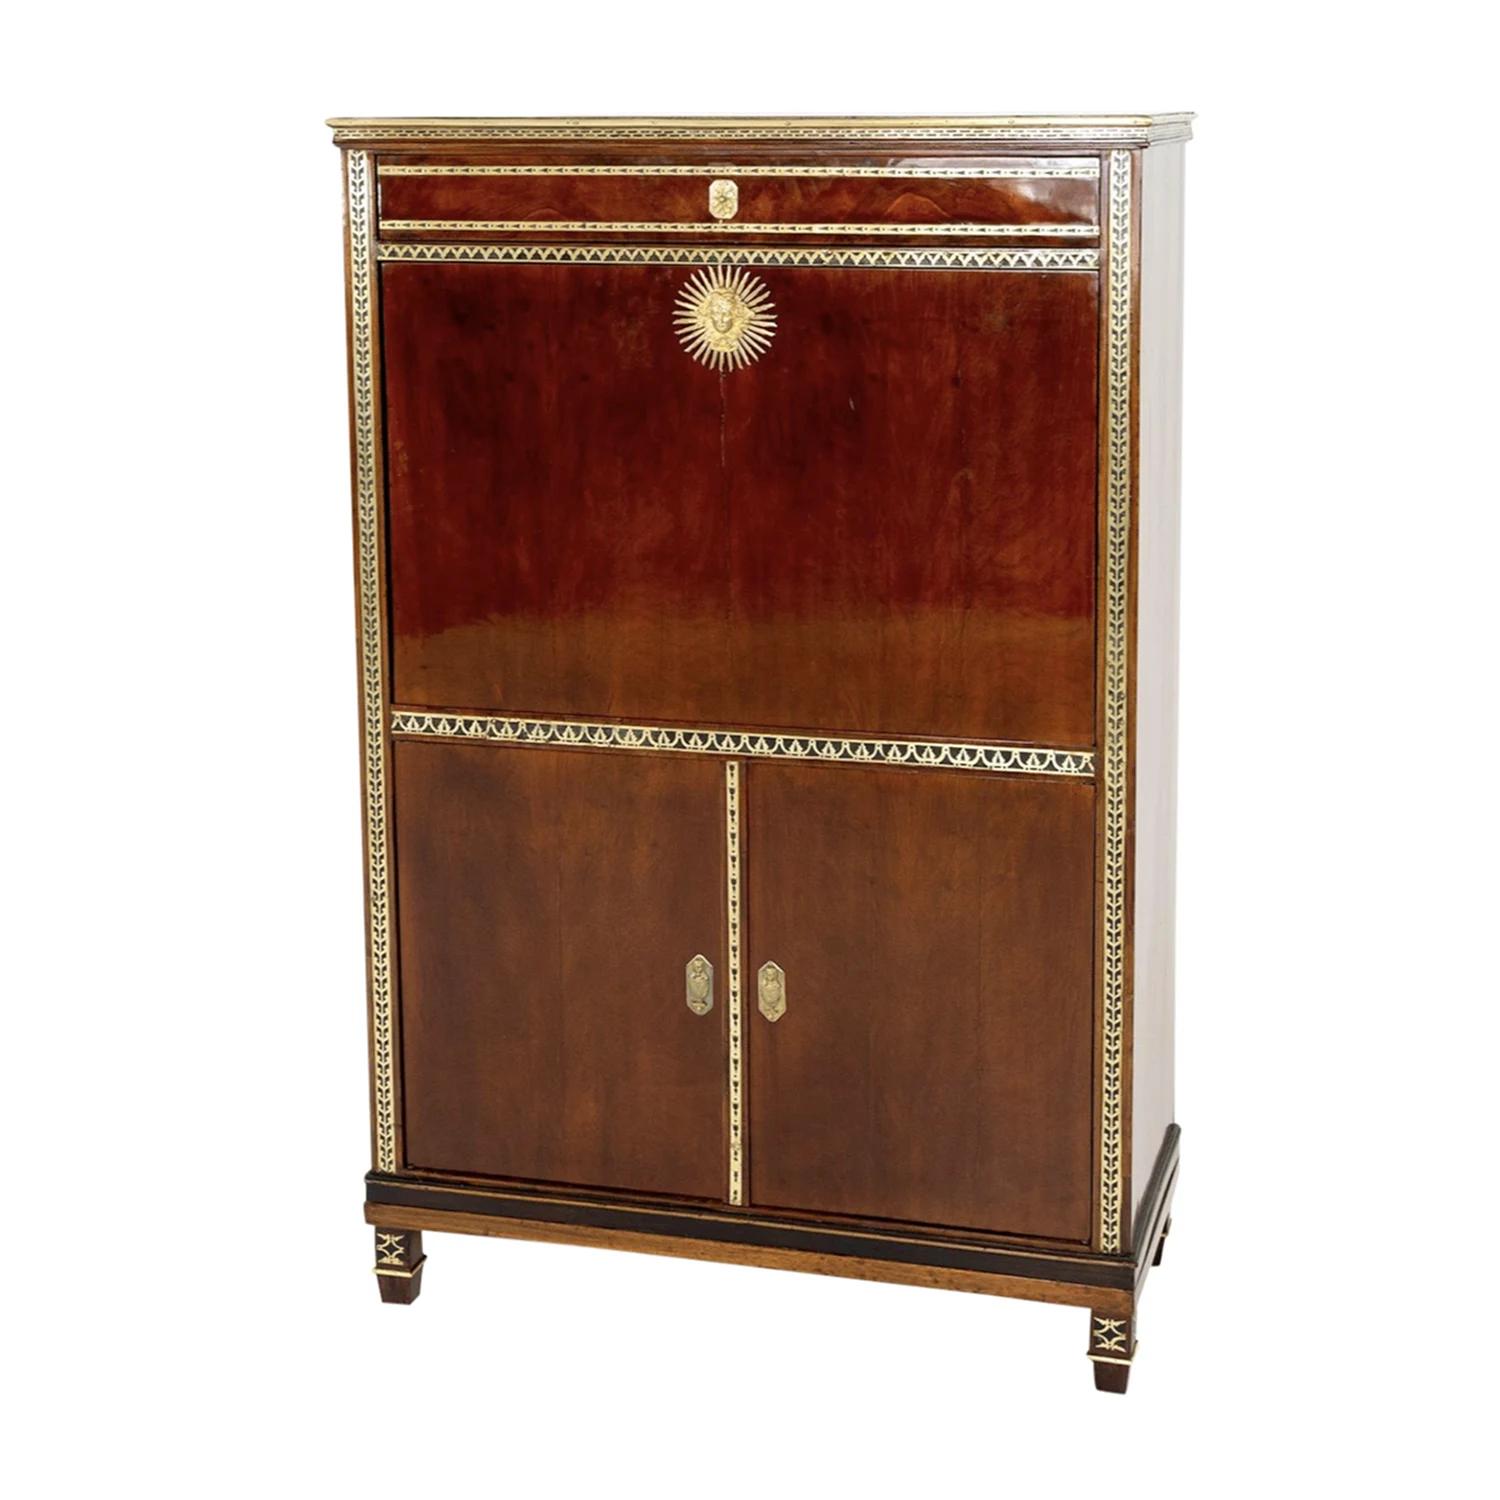 An antique Russian secretary with a writing flap made of hand crafted shellac polished, partly veneered Mahogany, designed and produced by Heinrich Gambs in good condition. The bottom part of the detailed cabinet is composed with two doors,